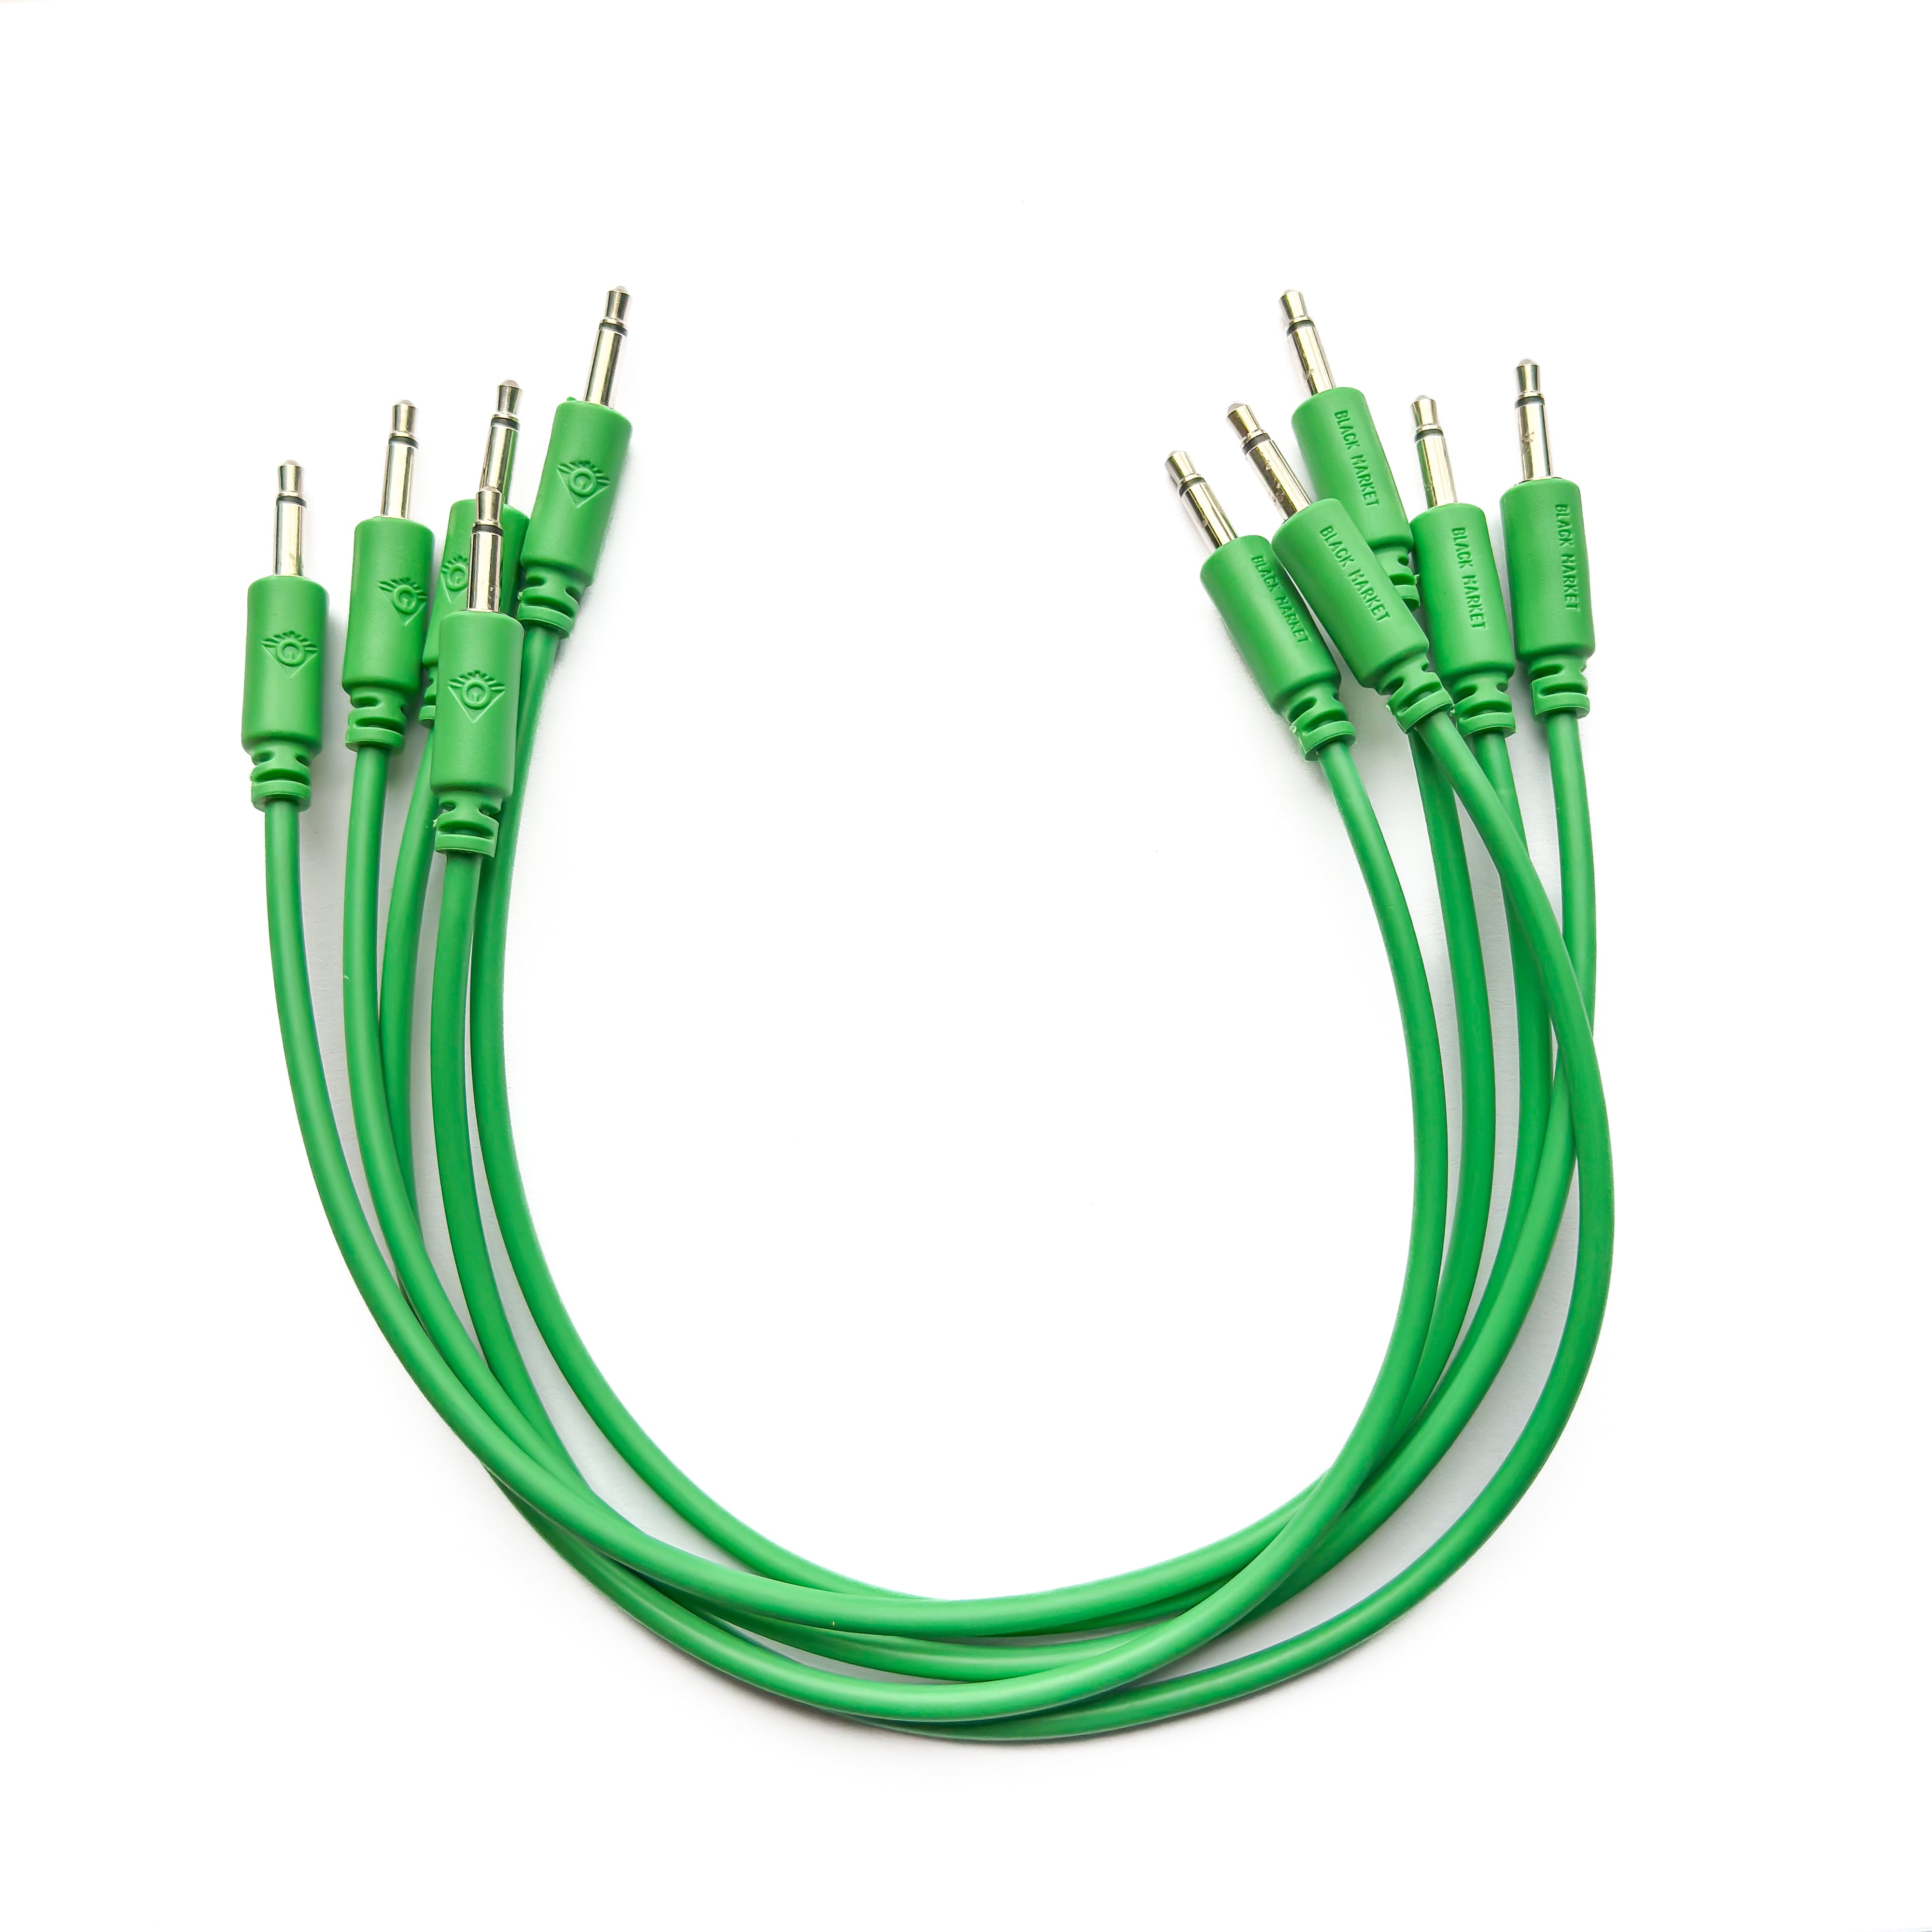 Black Market Modular 3.5mm Patch Cable 5-Pack - 25cm/10" - Green View 1